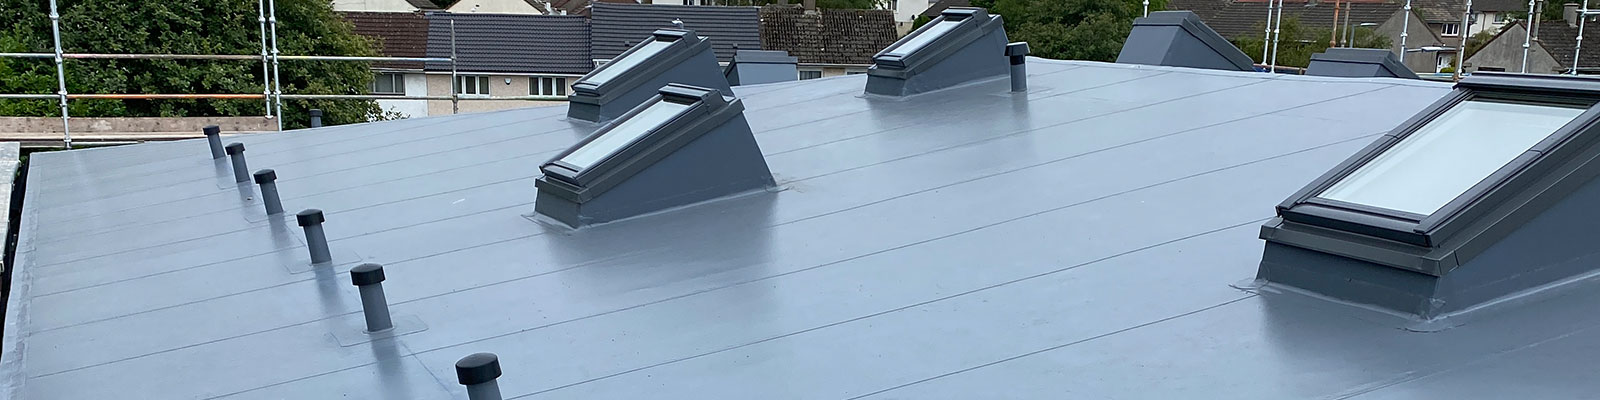 Single Ply Roofing Services across Glasgow